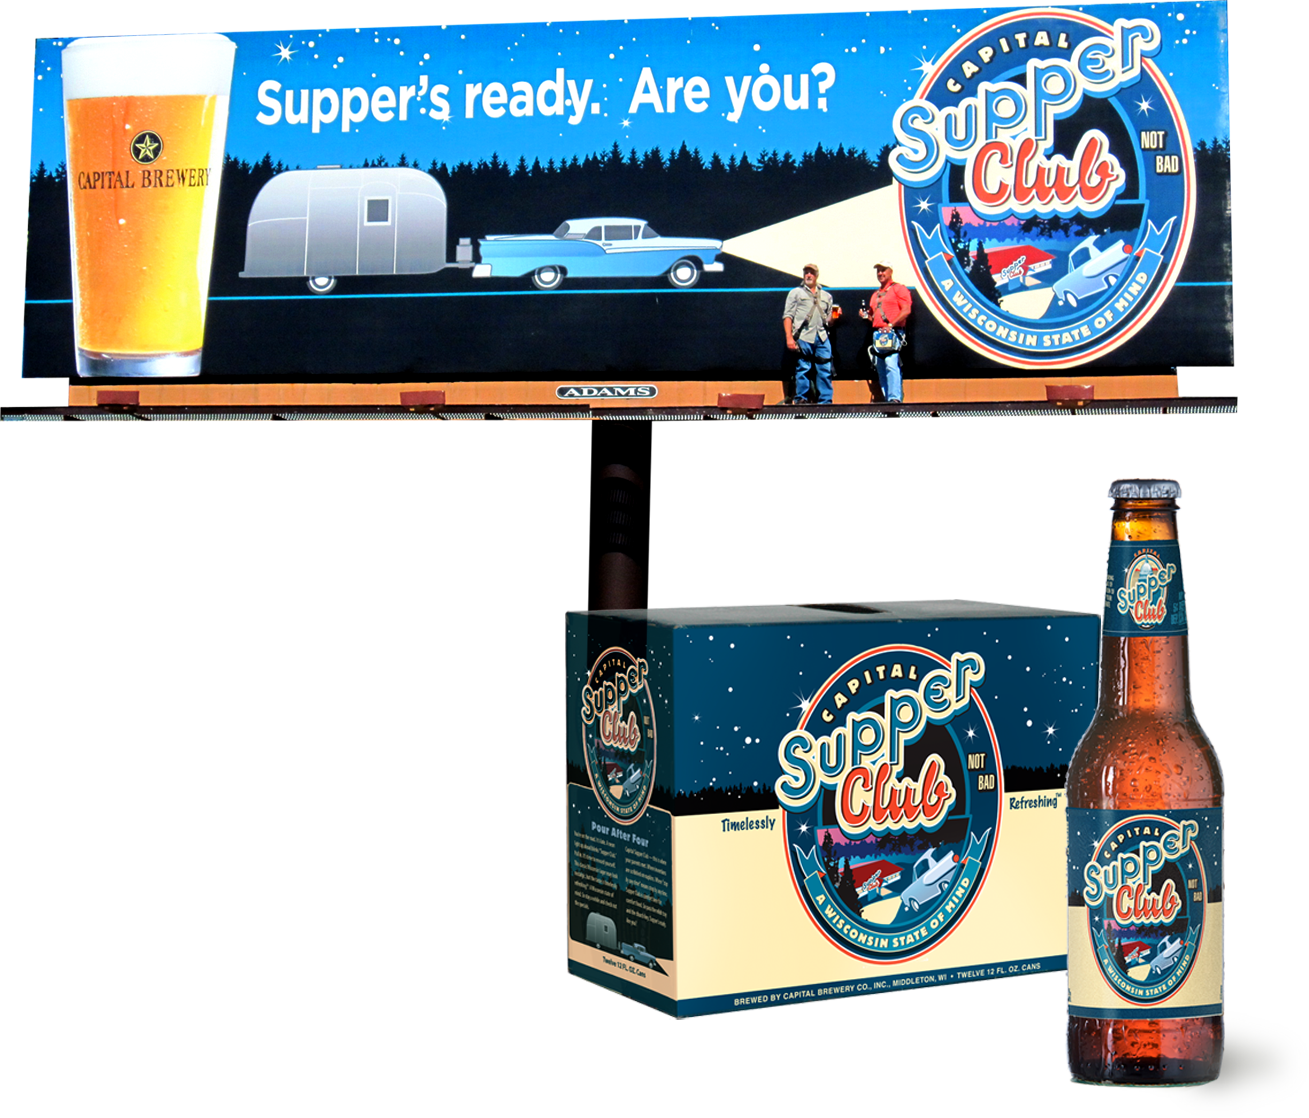 Capital Brewery billboard, Supper Club 12-pack and single bottle